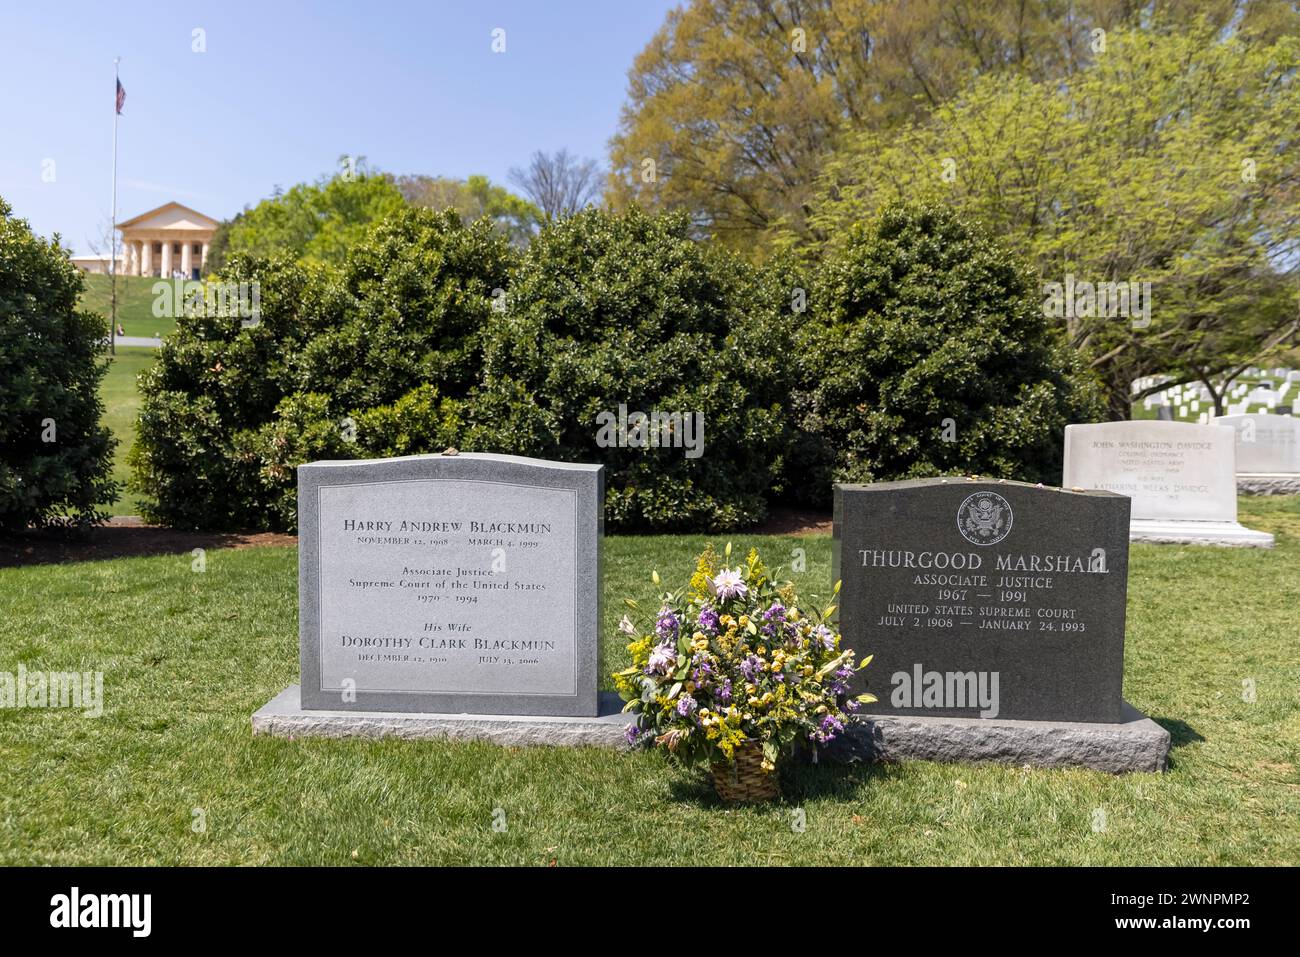 Arlington National Cemetery is the final resting place for many of the nation’s most famous people who’ve served America. Stock Photo